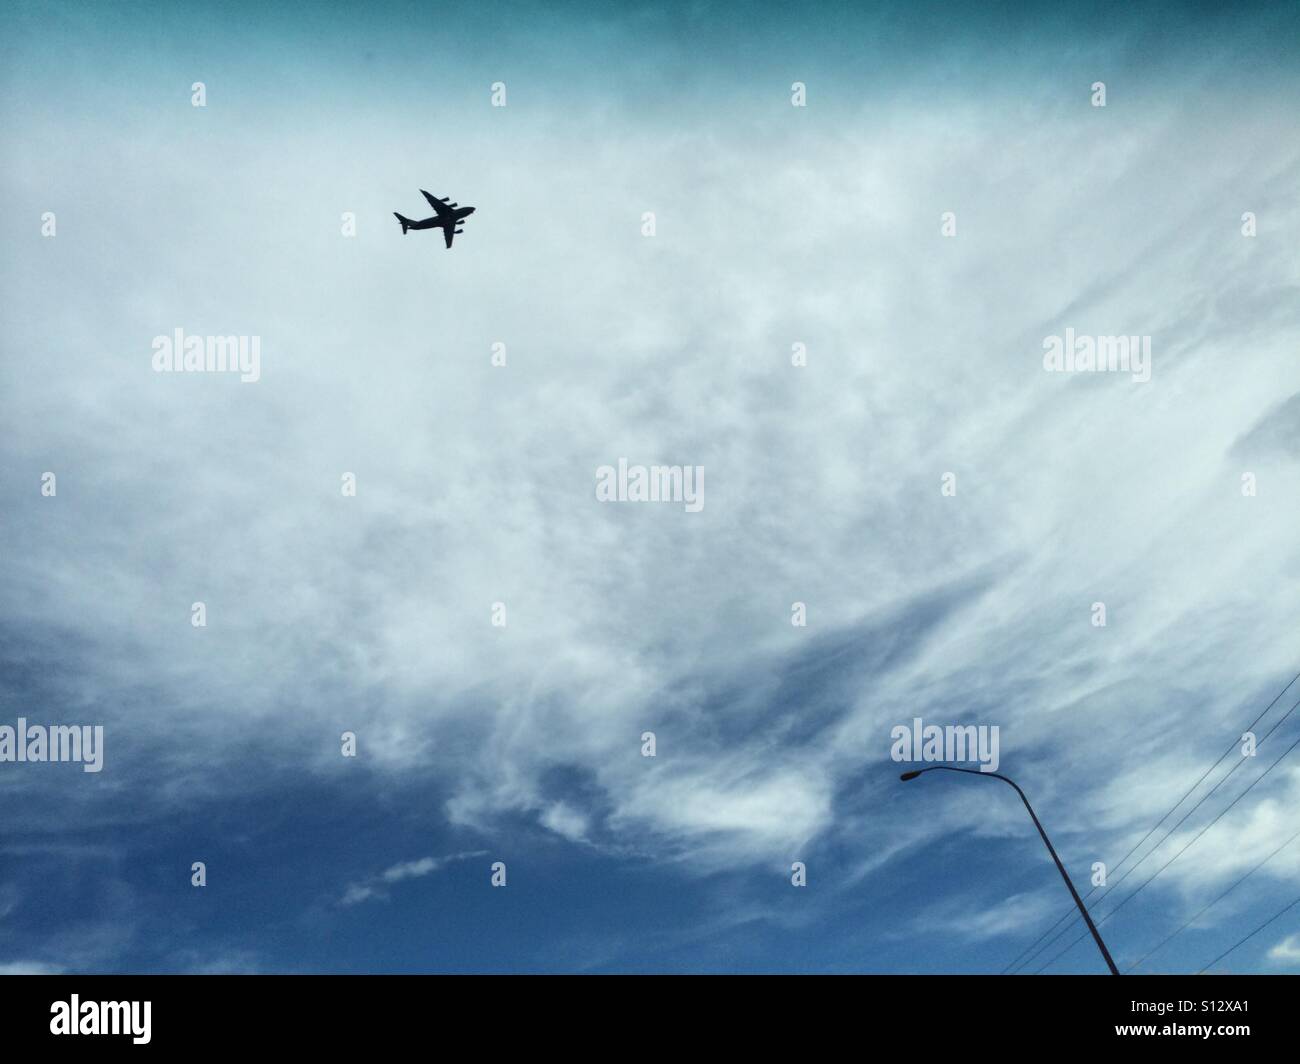 Plane flying across a cloudy sky. Stock Photo